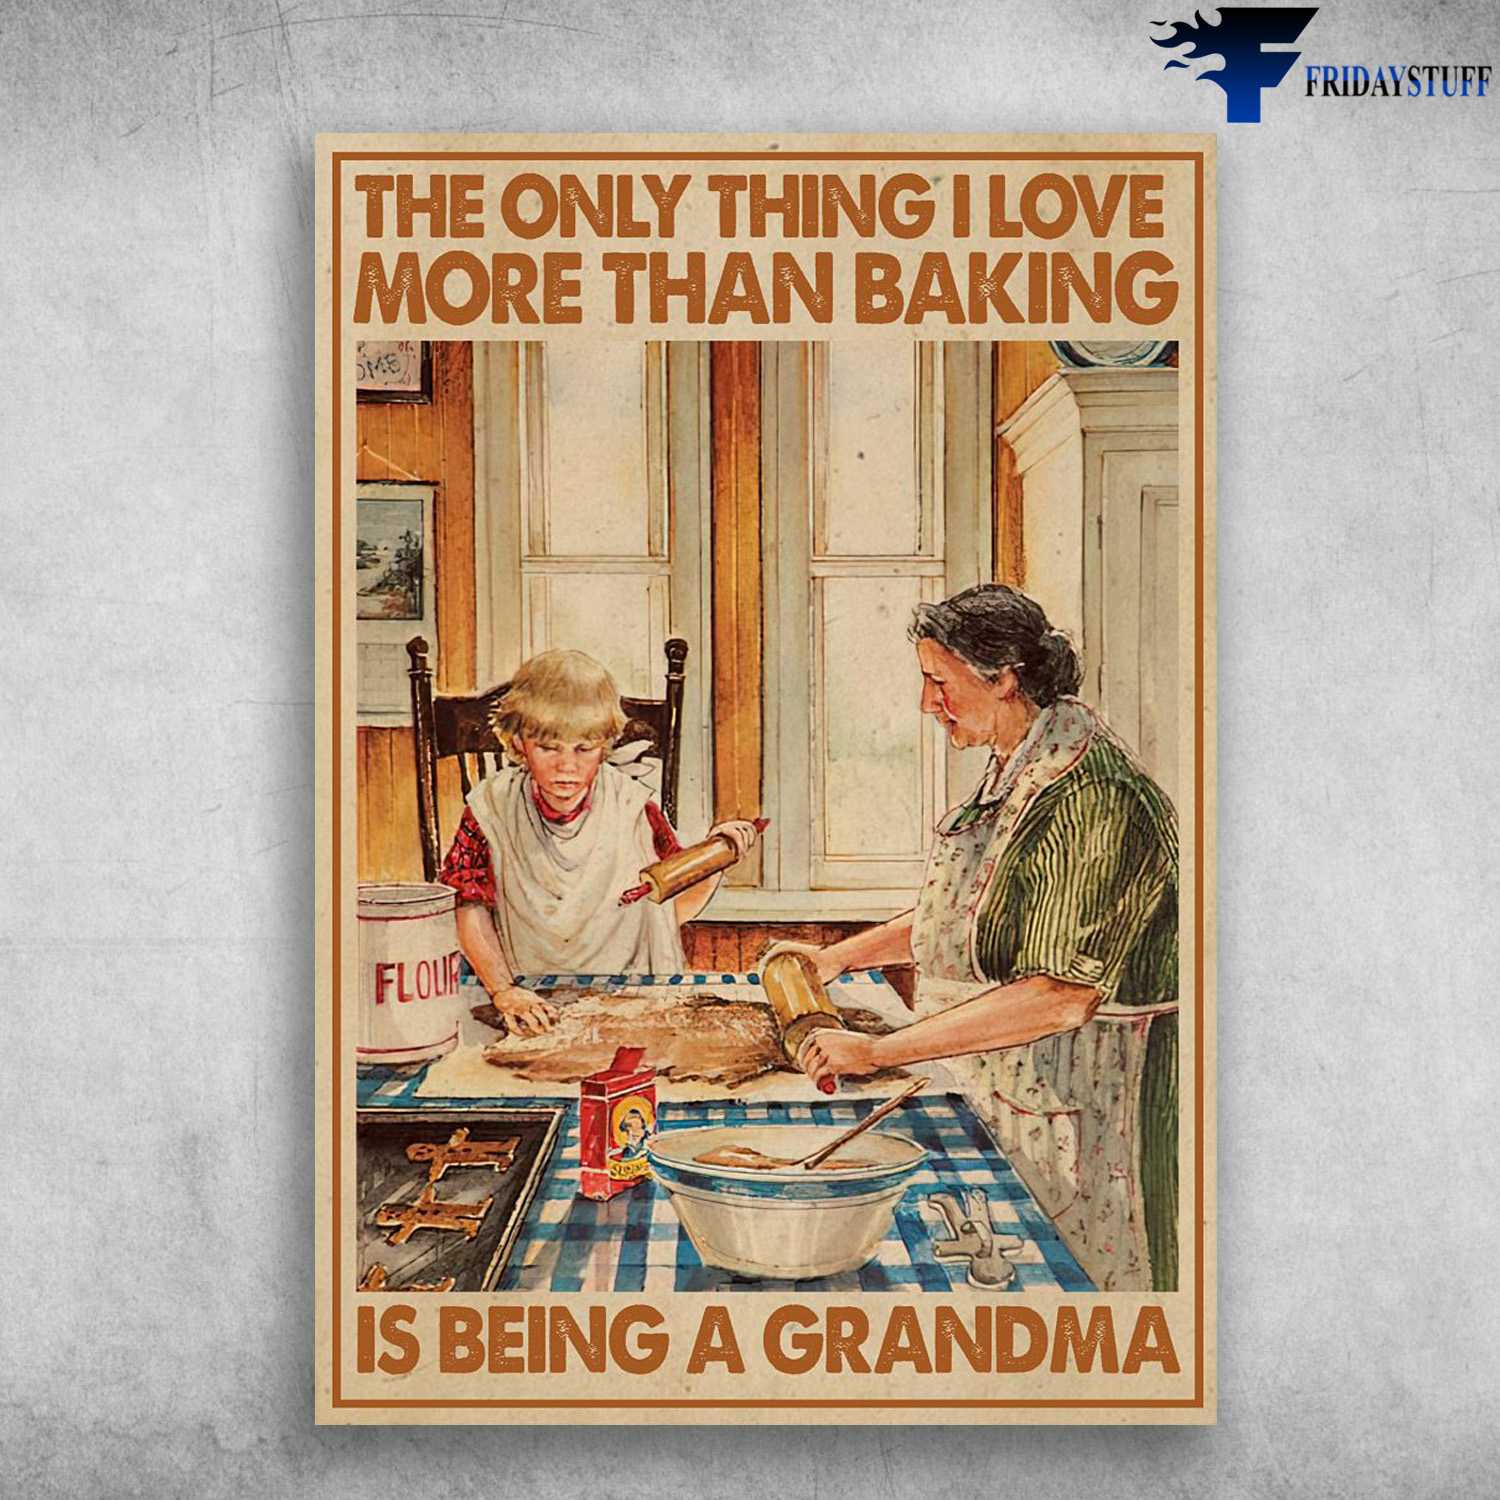 Baking Lover, Baking Poster, The Only Thing I Love More Than Baking, Is Being A Grandma